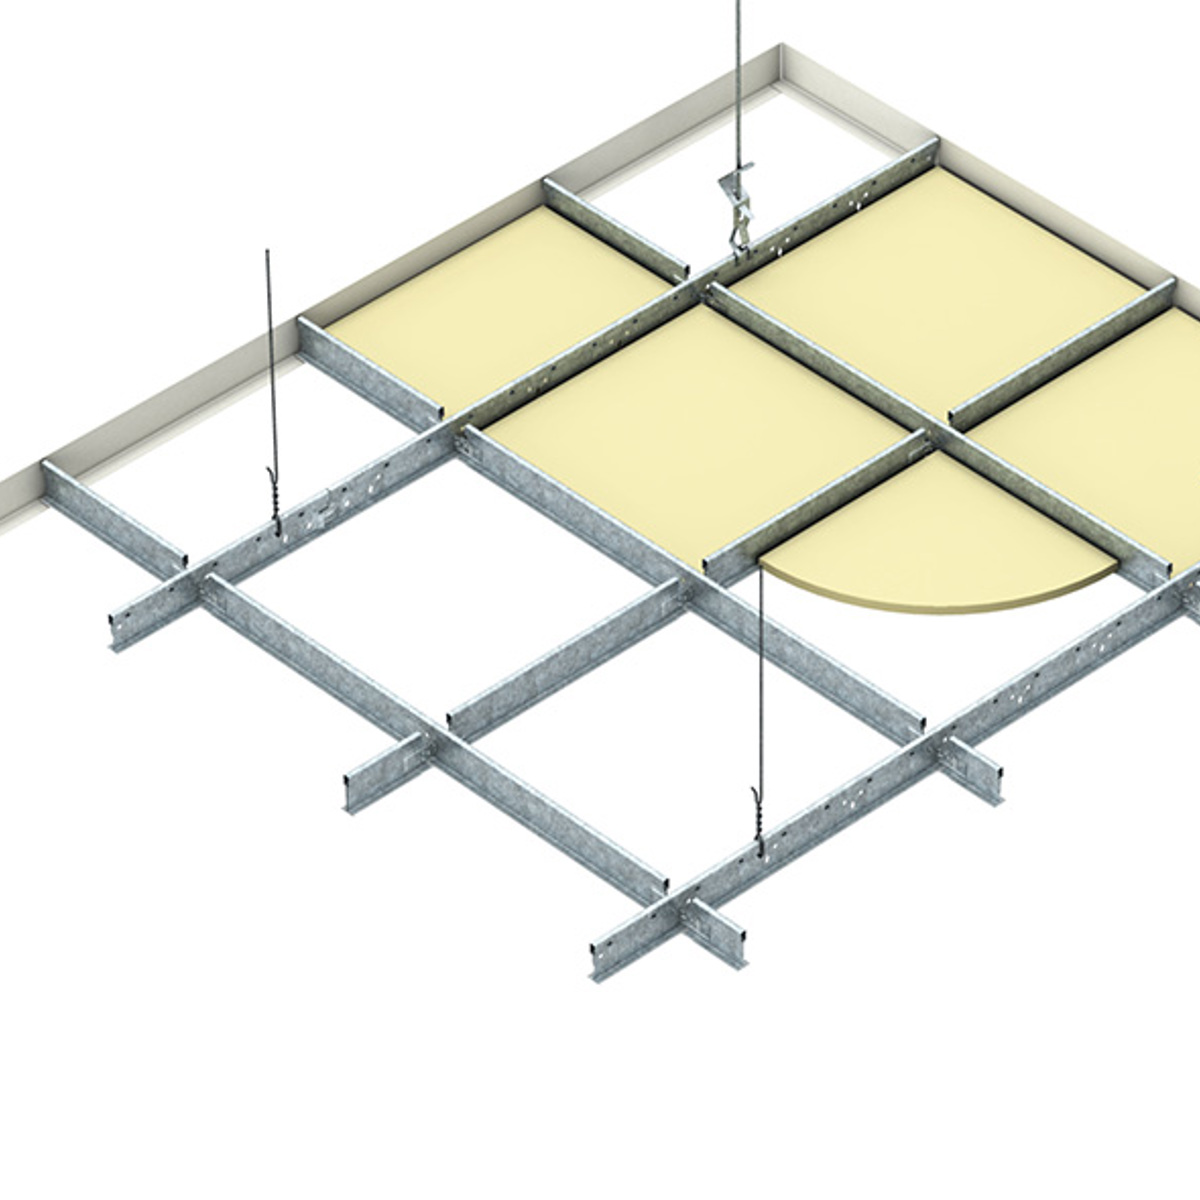 Donn Exposed Grid Ceiling System